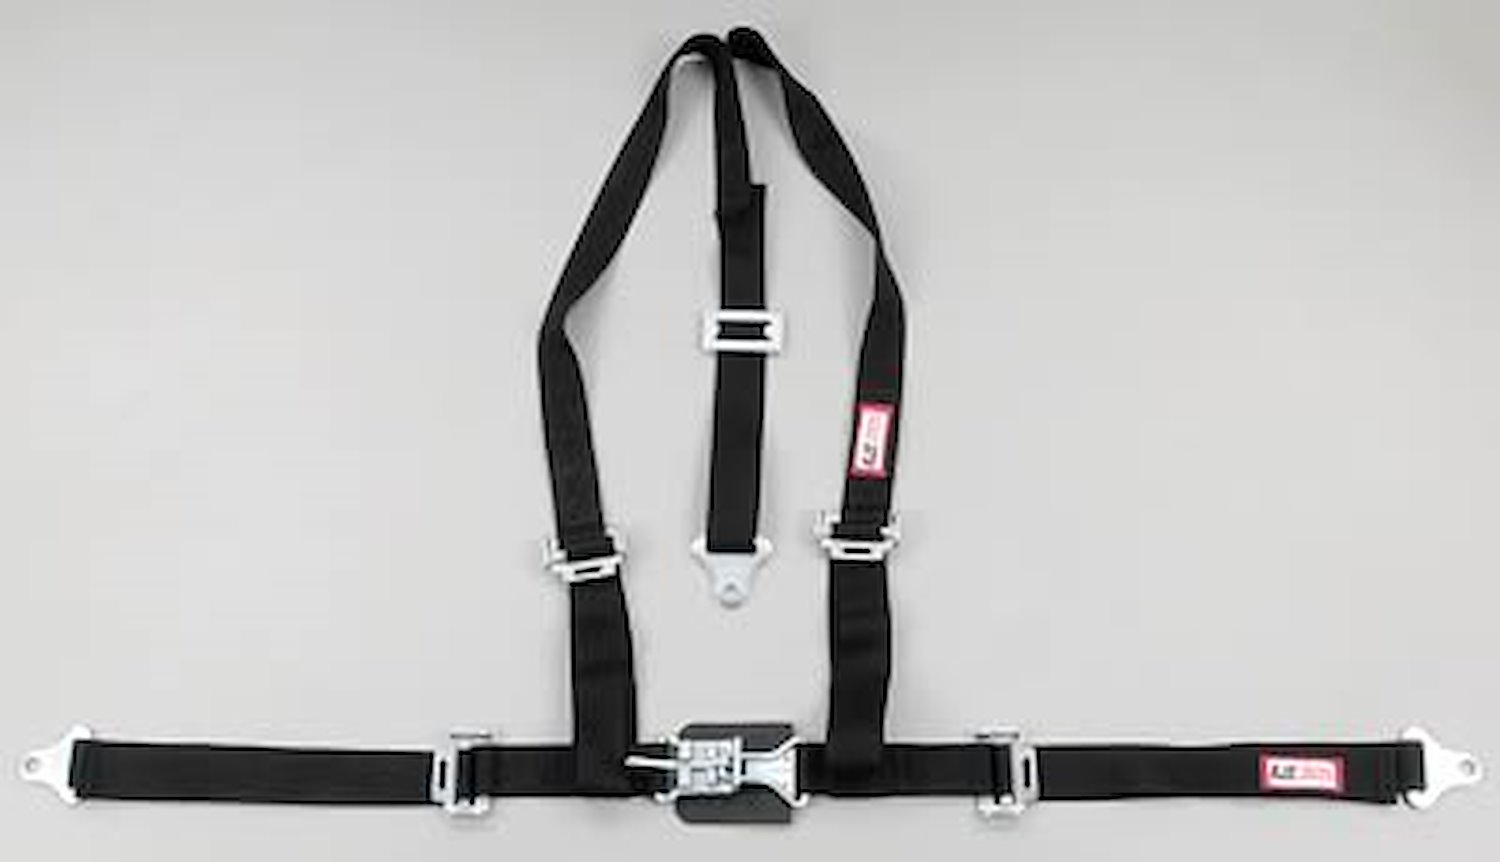 NON-SFI L&L HARNESS 3 PULL UP Lap Belt SEWN IN 2 Shoulder Harness V ROLL BAR Mount ALL BOLT ENDS GRAY